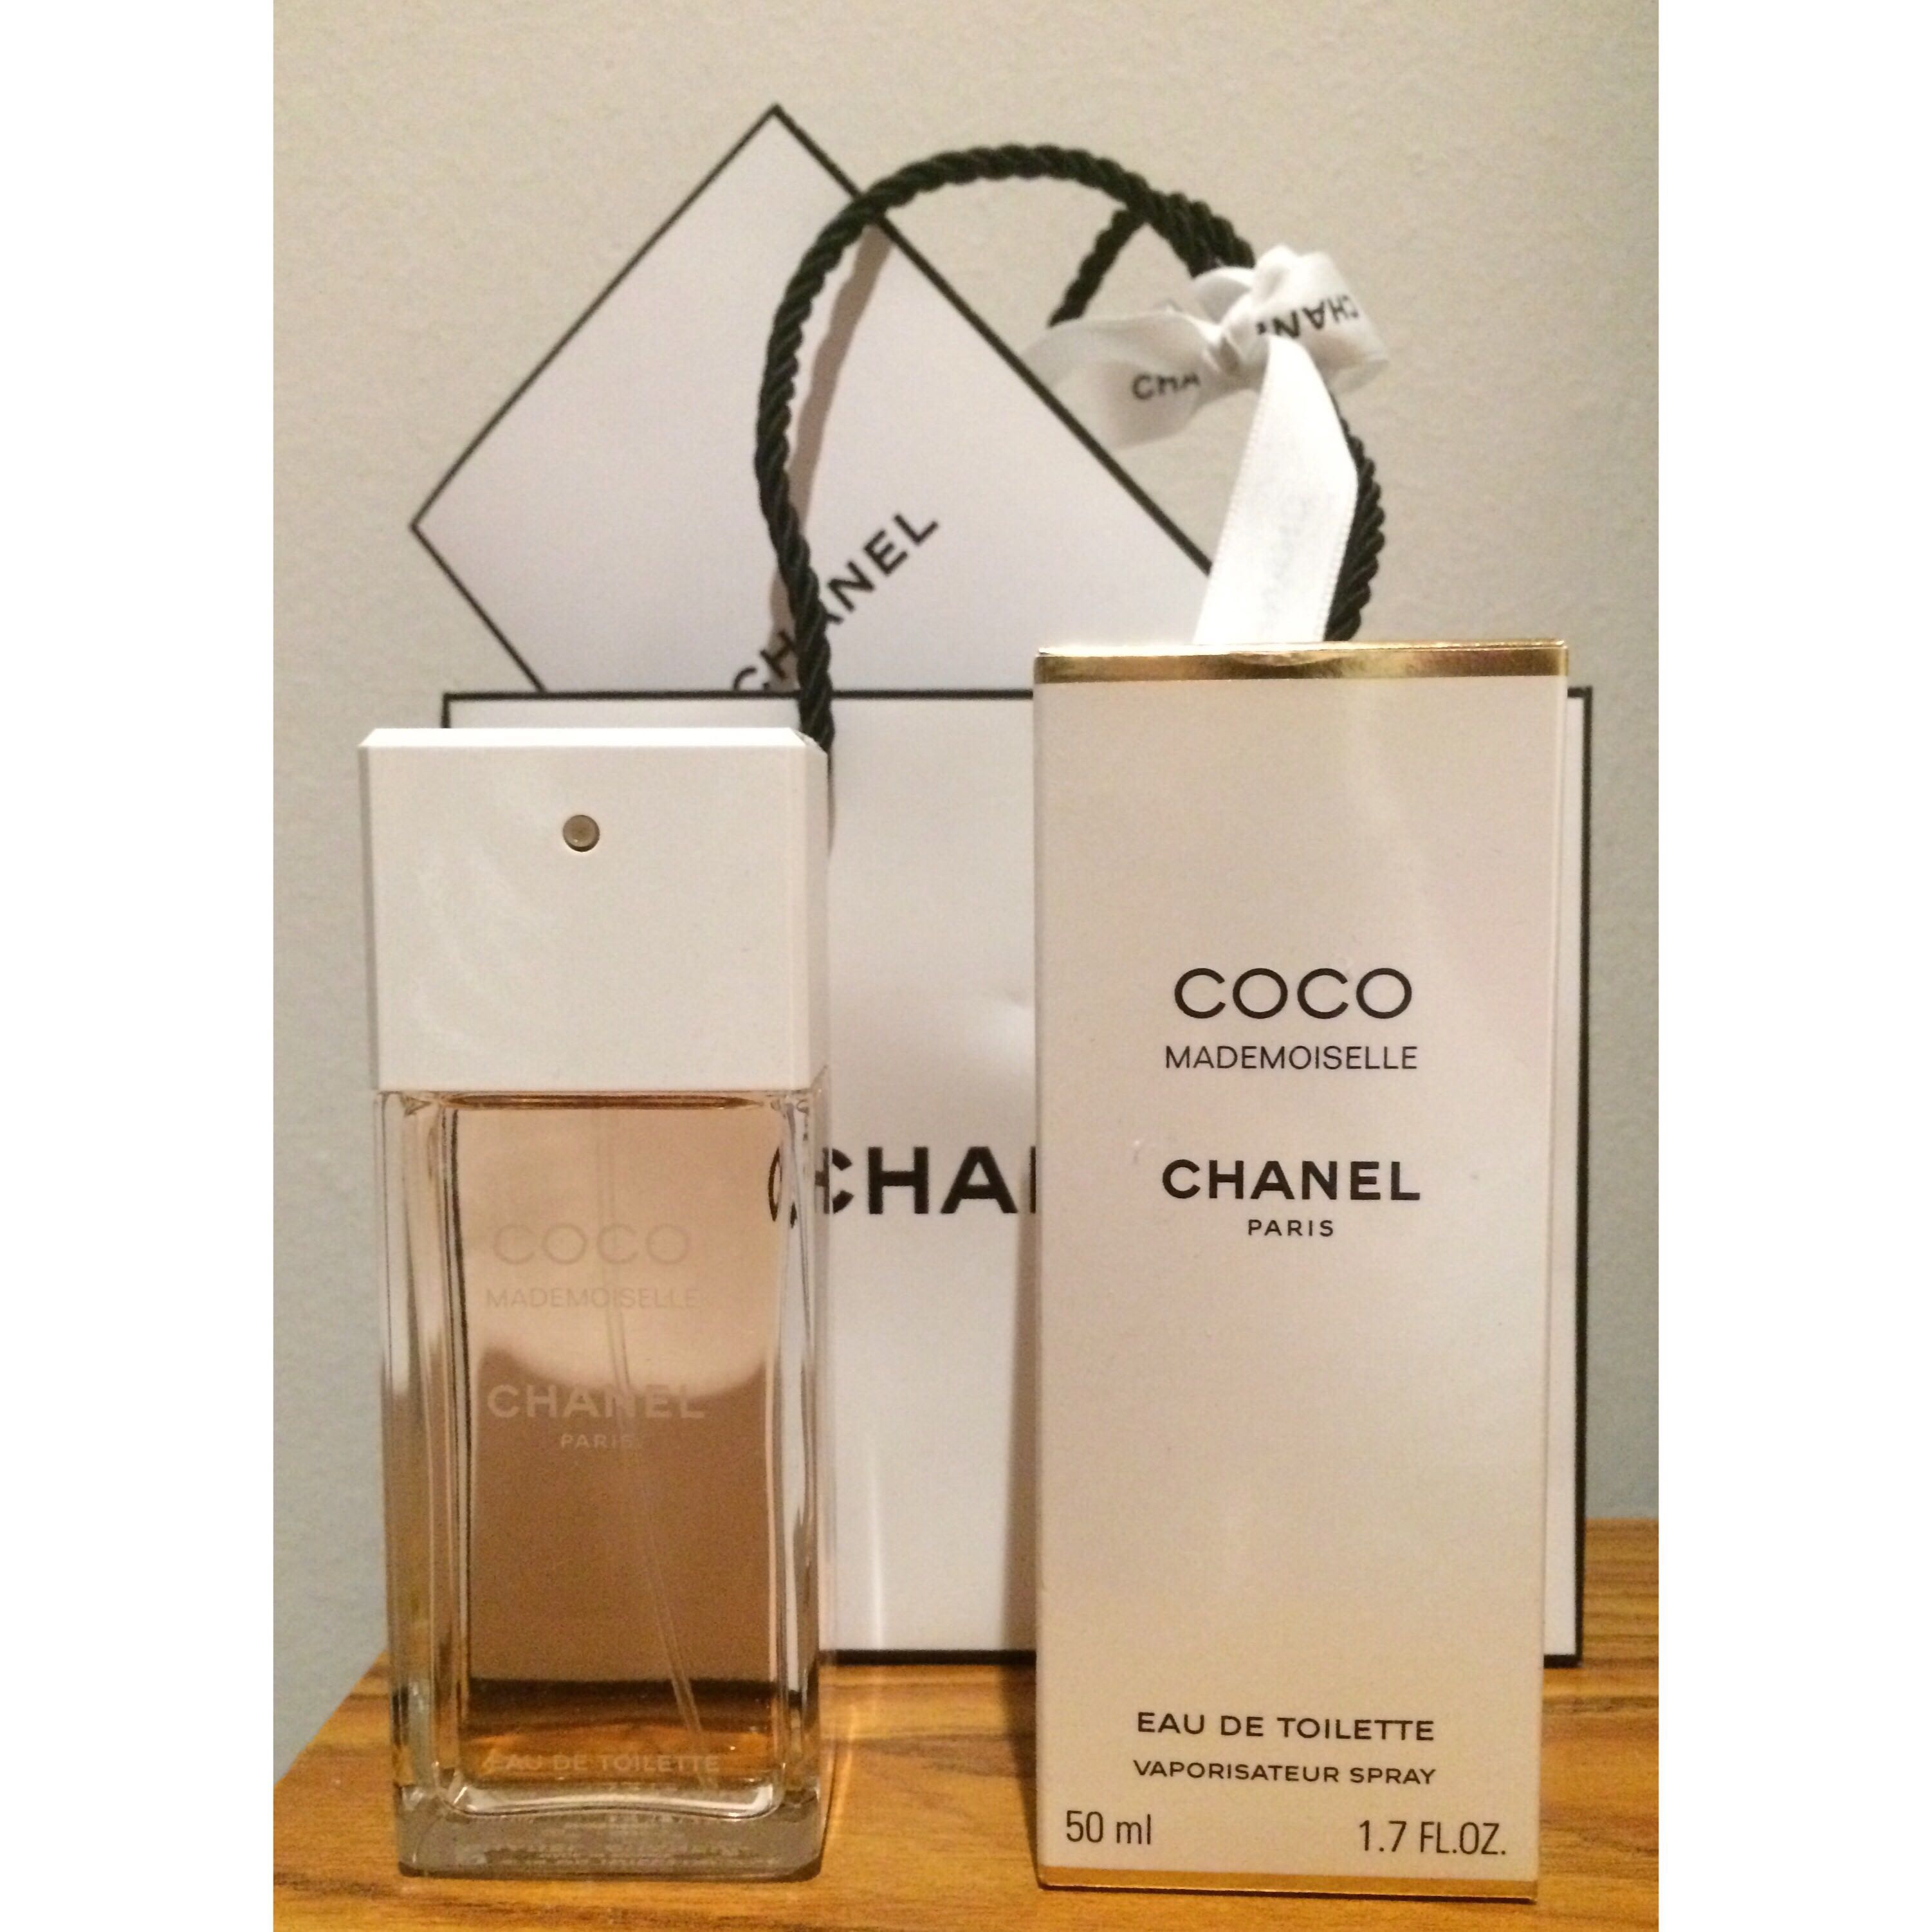 Chanel Coco Mademoiselle edt 100ml Best Price  Compare deals at PriceSpy UK